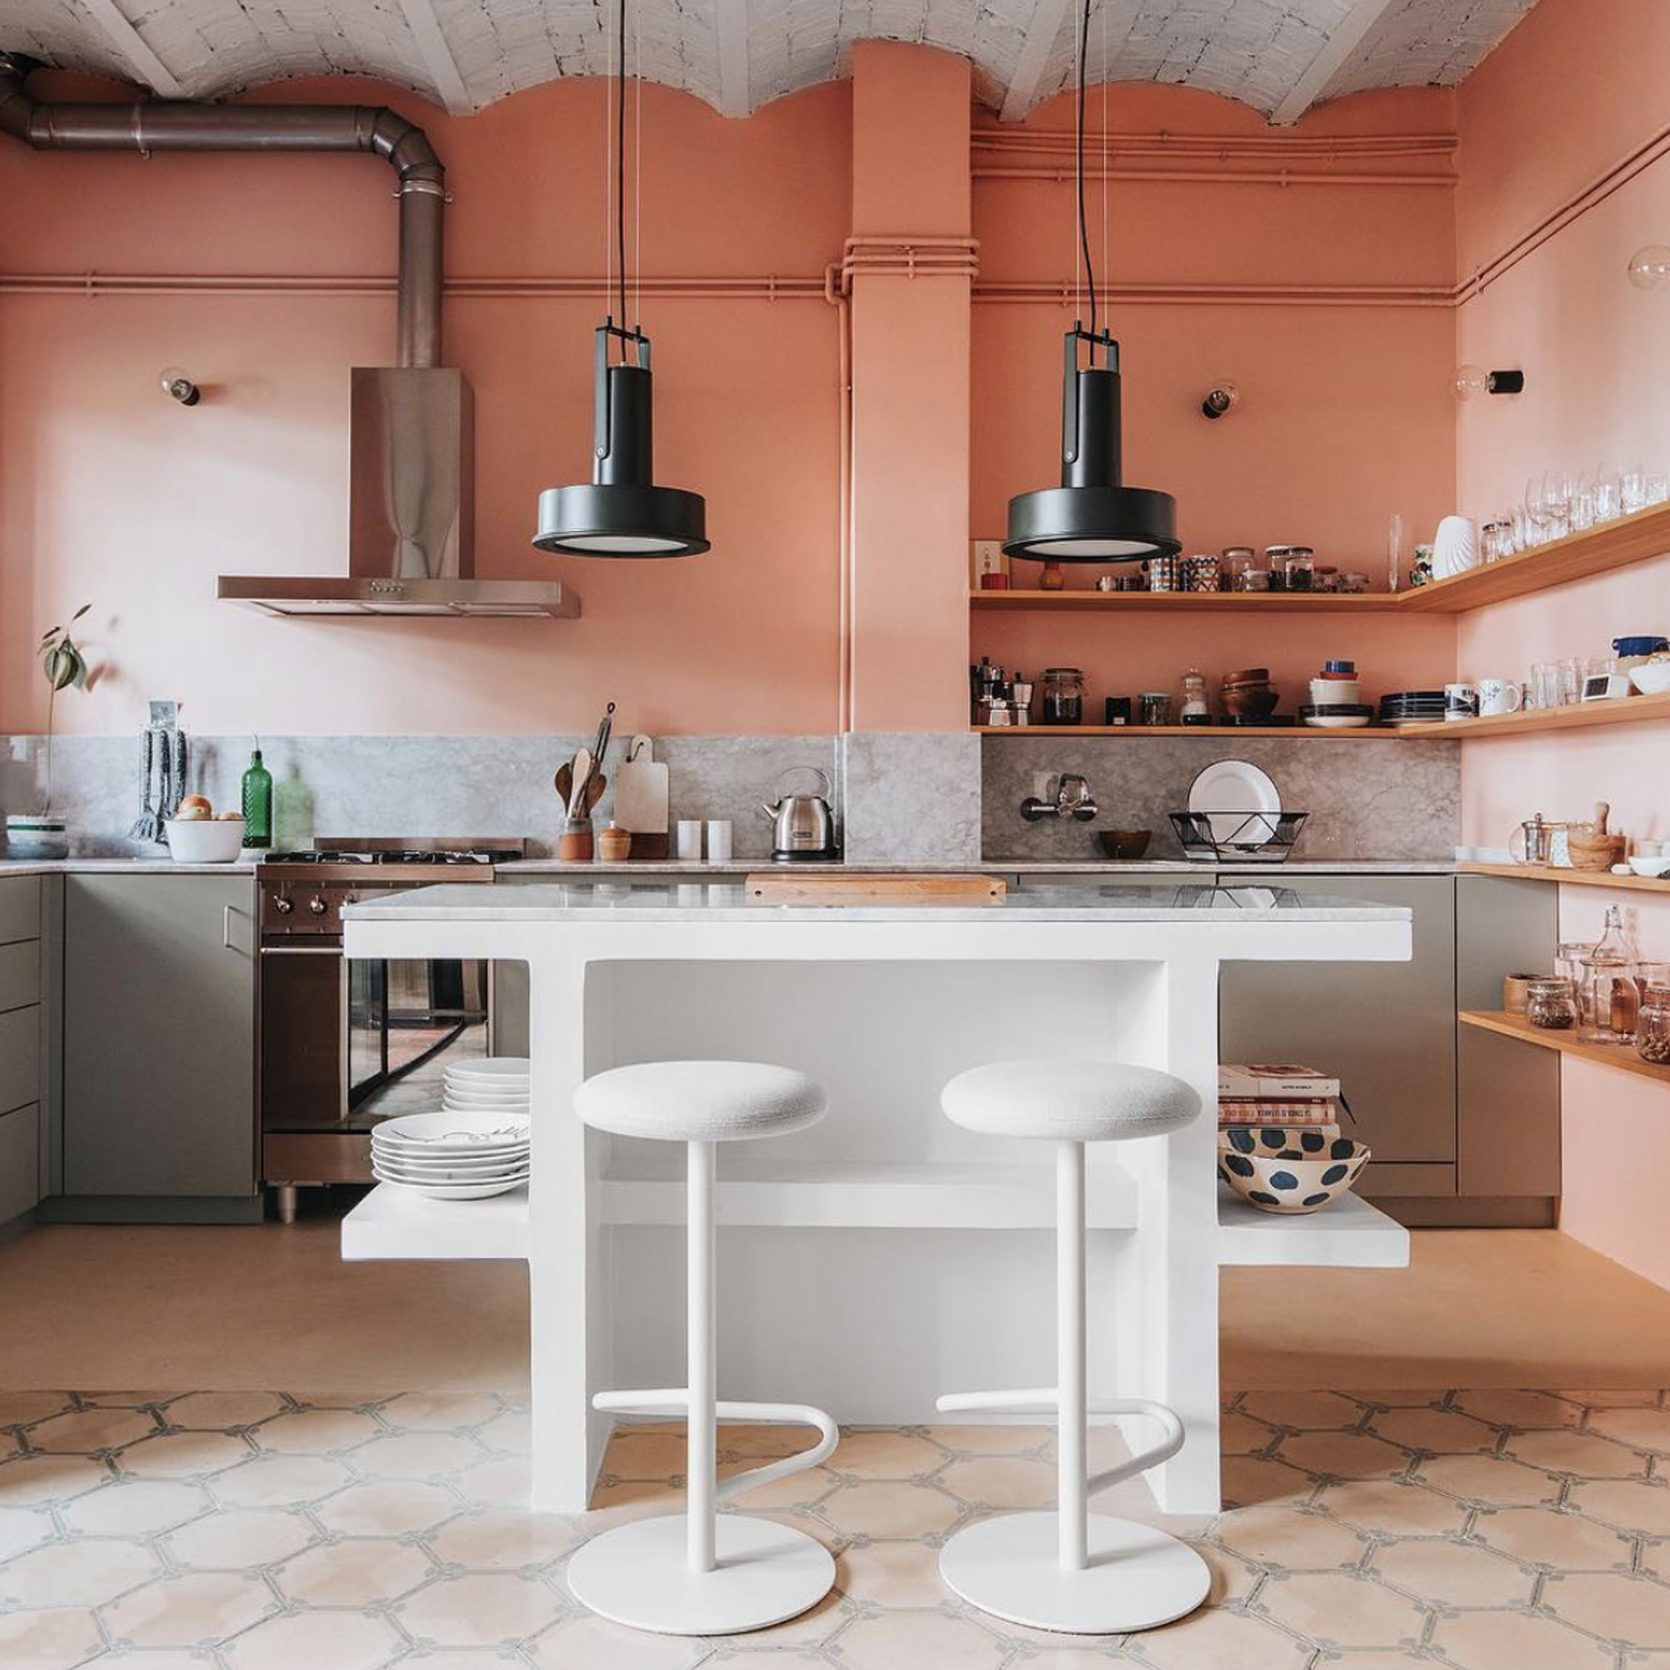  Interior Design Color Trends of 2019! Click to see more about kitchen and bathroom color ideas, schemes, cabinets! | VIGO Industries - Modern Bathroom Sinks and Faucets - Home Interior 